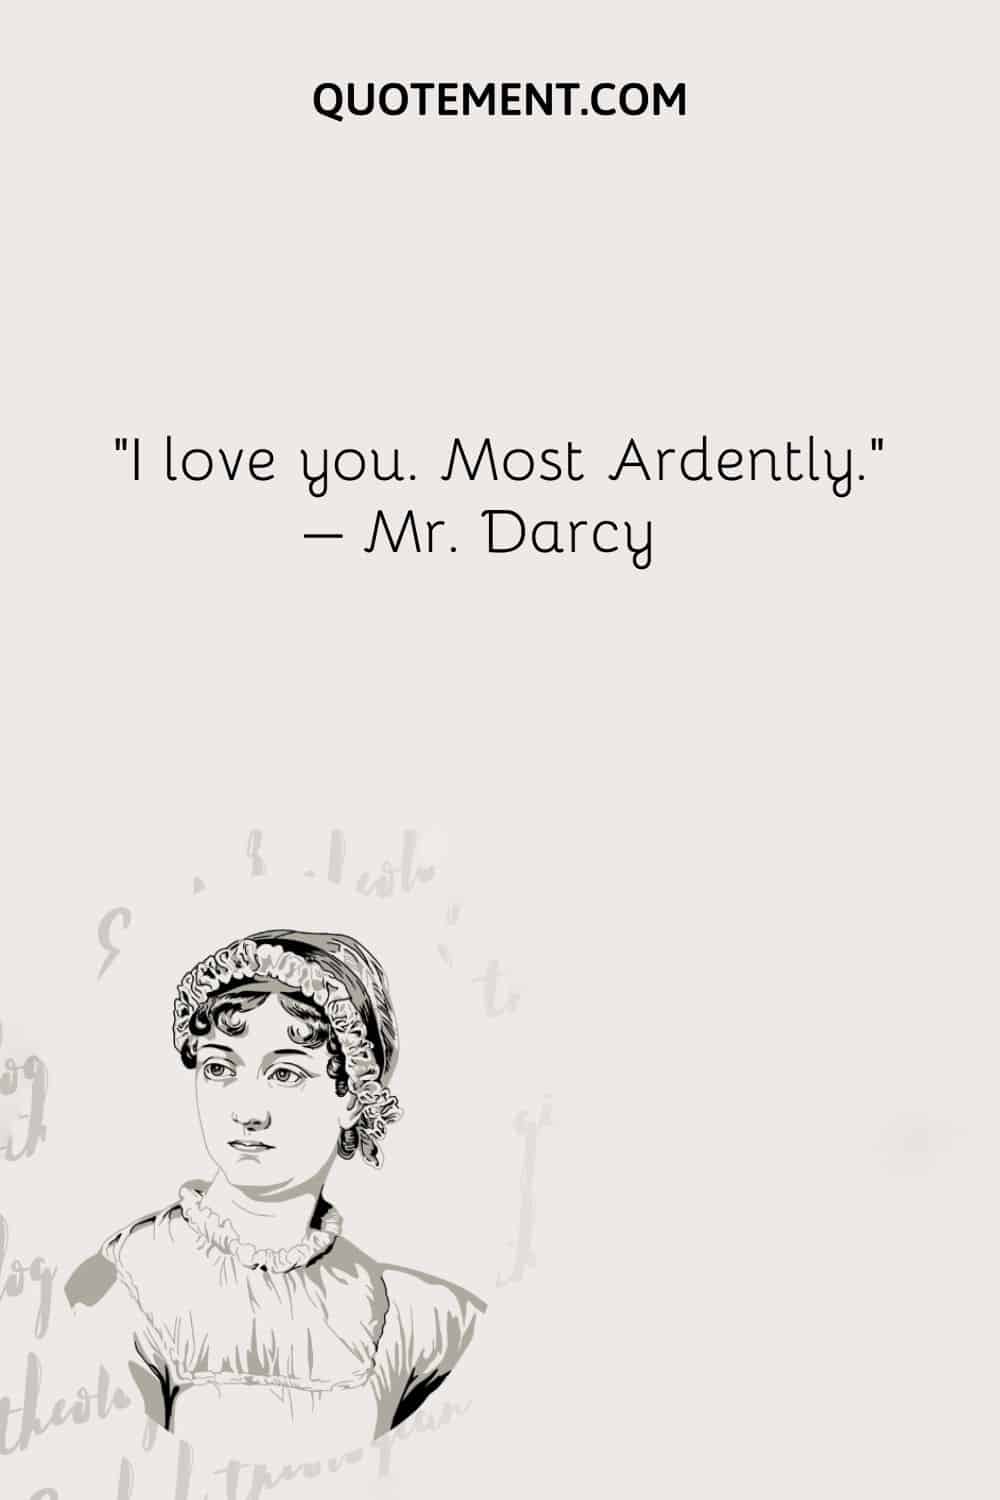 I love you. Most Ardently. – Mr. Darcy